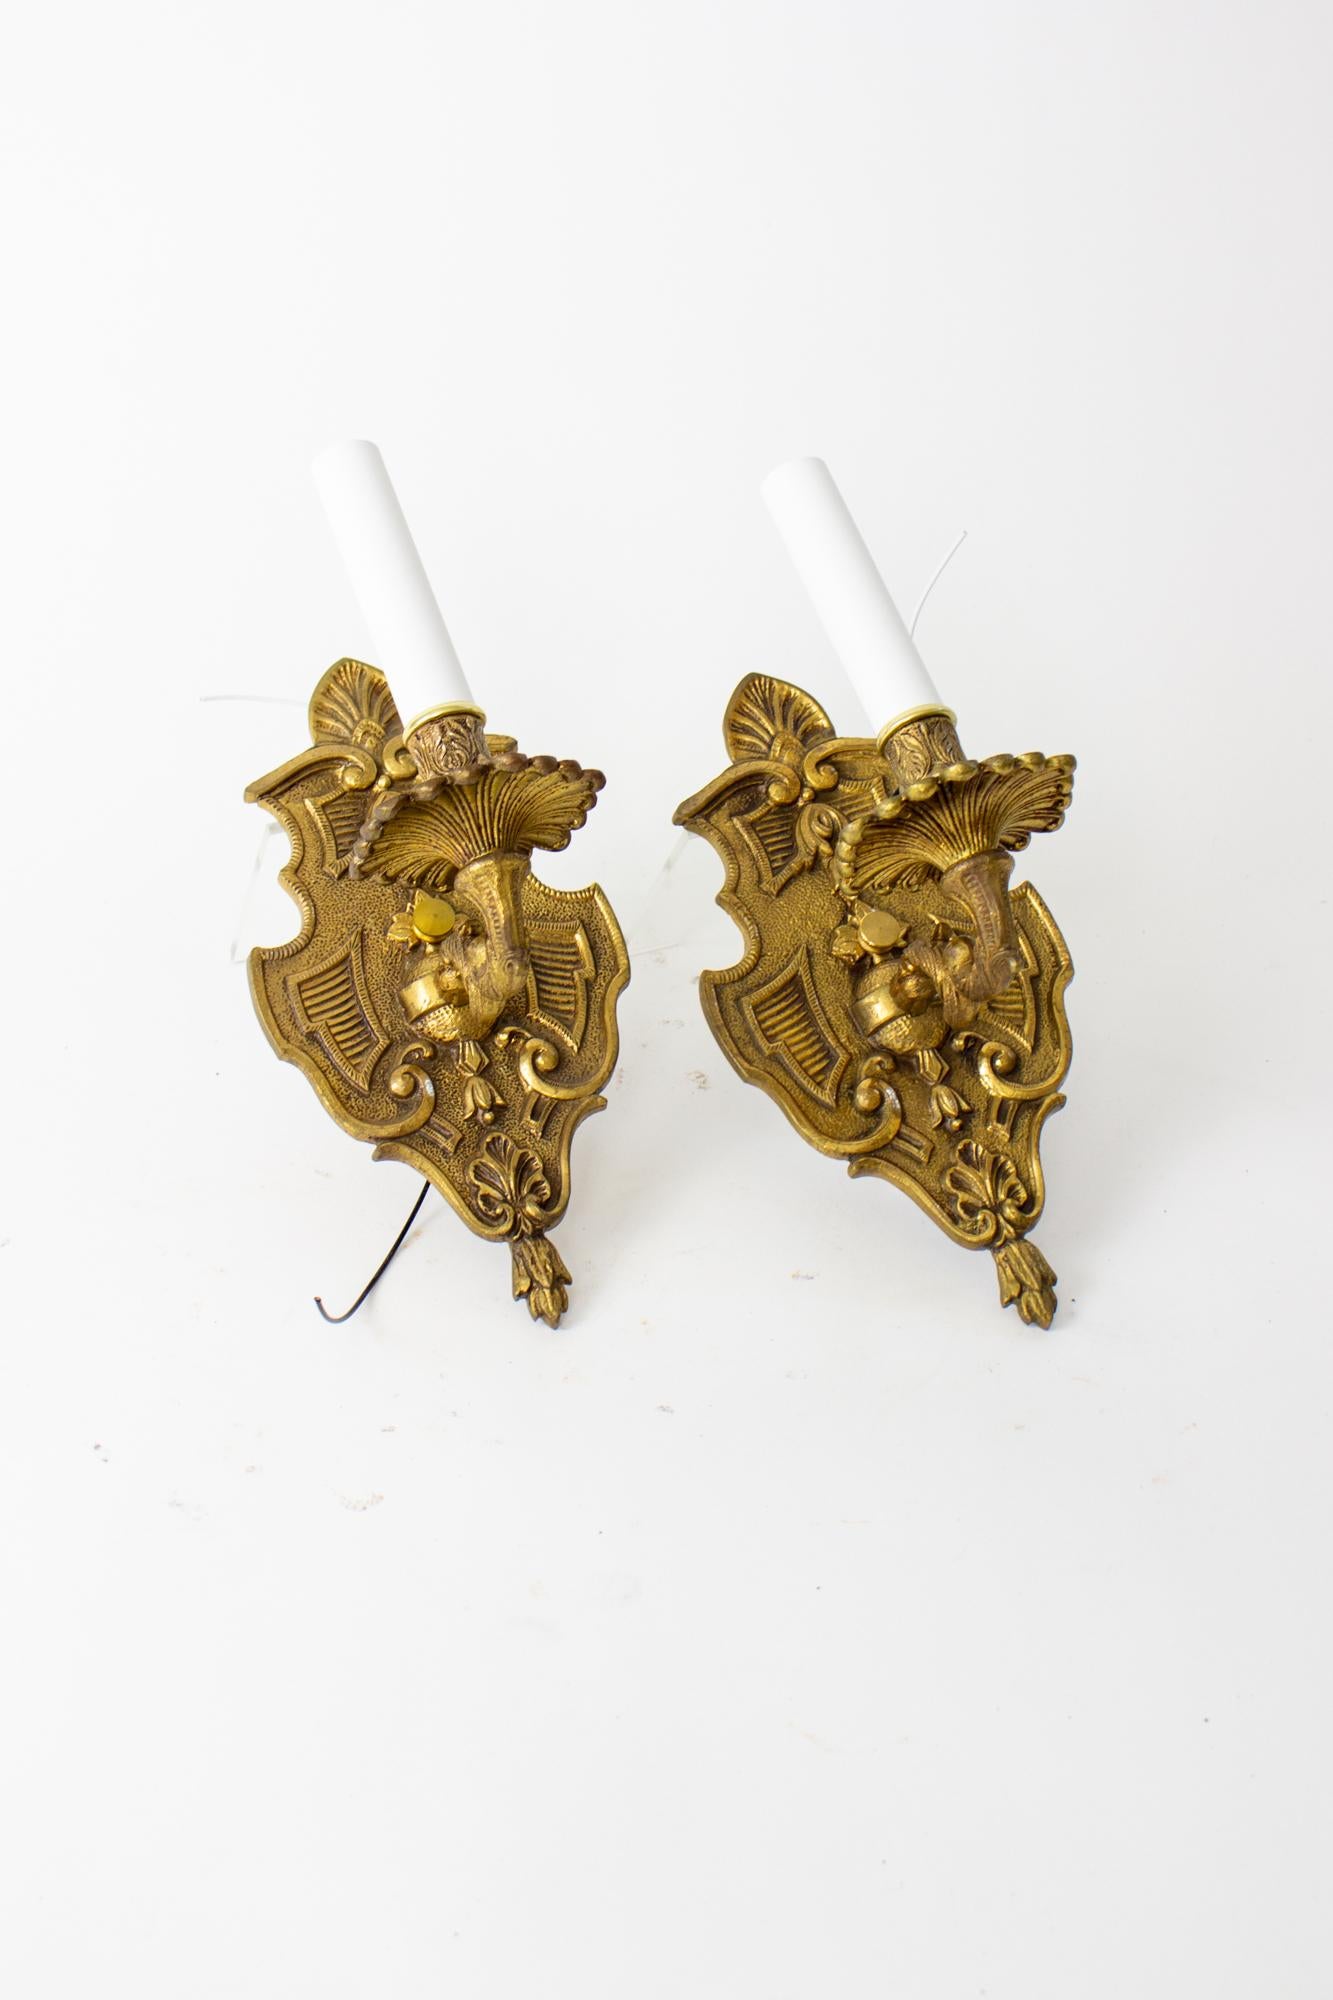 Hollywood Regency Mid 20th Century Spanish Cast Brass Sconces - a Pair For Sale